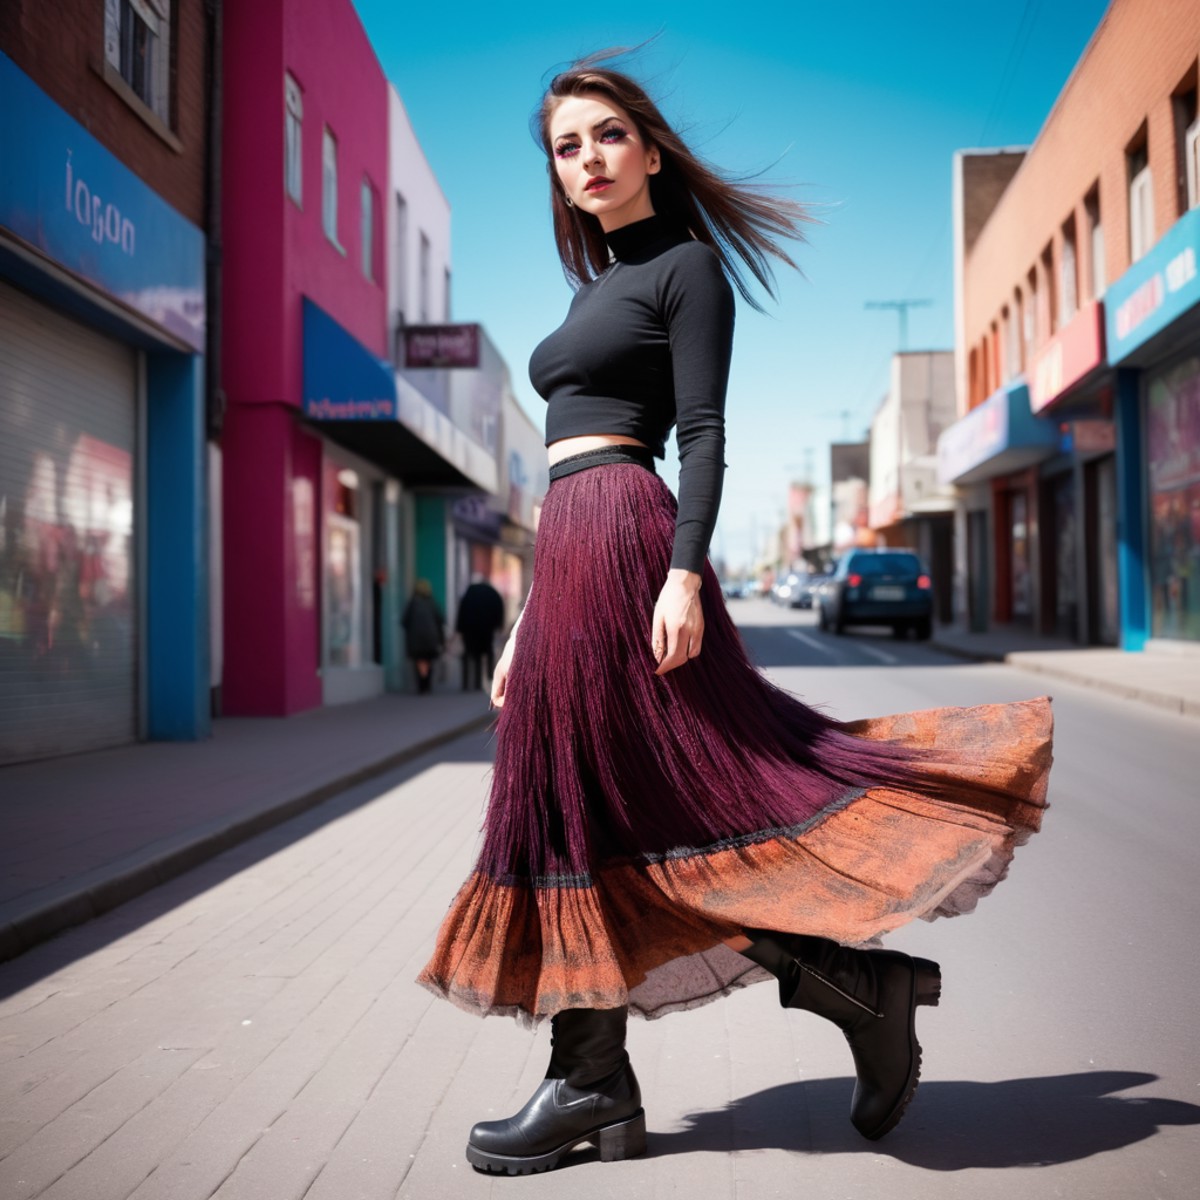 Cinematic photograph. Woman wearing a long skirt and top and boots with very long eyelashes. Vivid colour. Extremely inter...